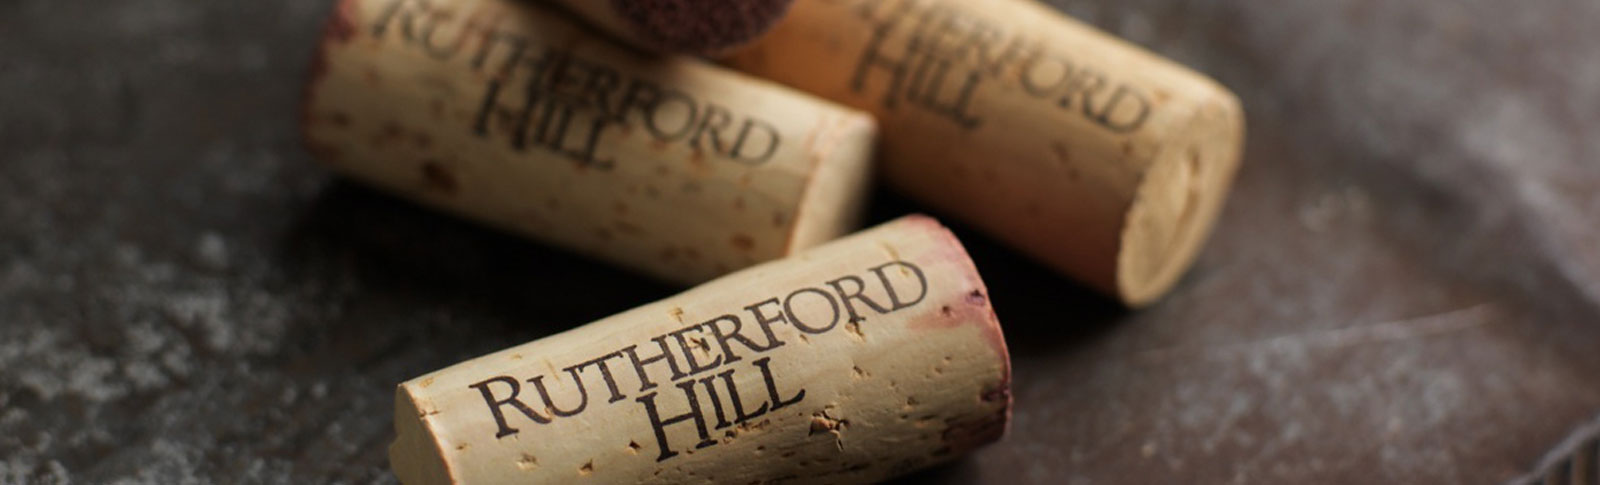 Rutherford Hill banner image